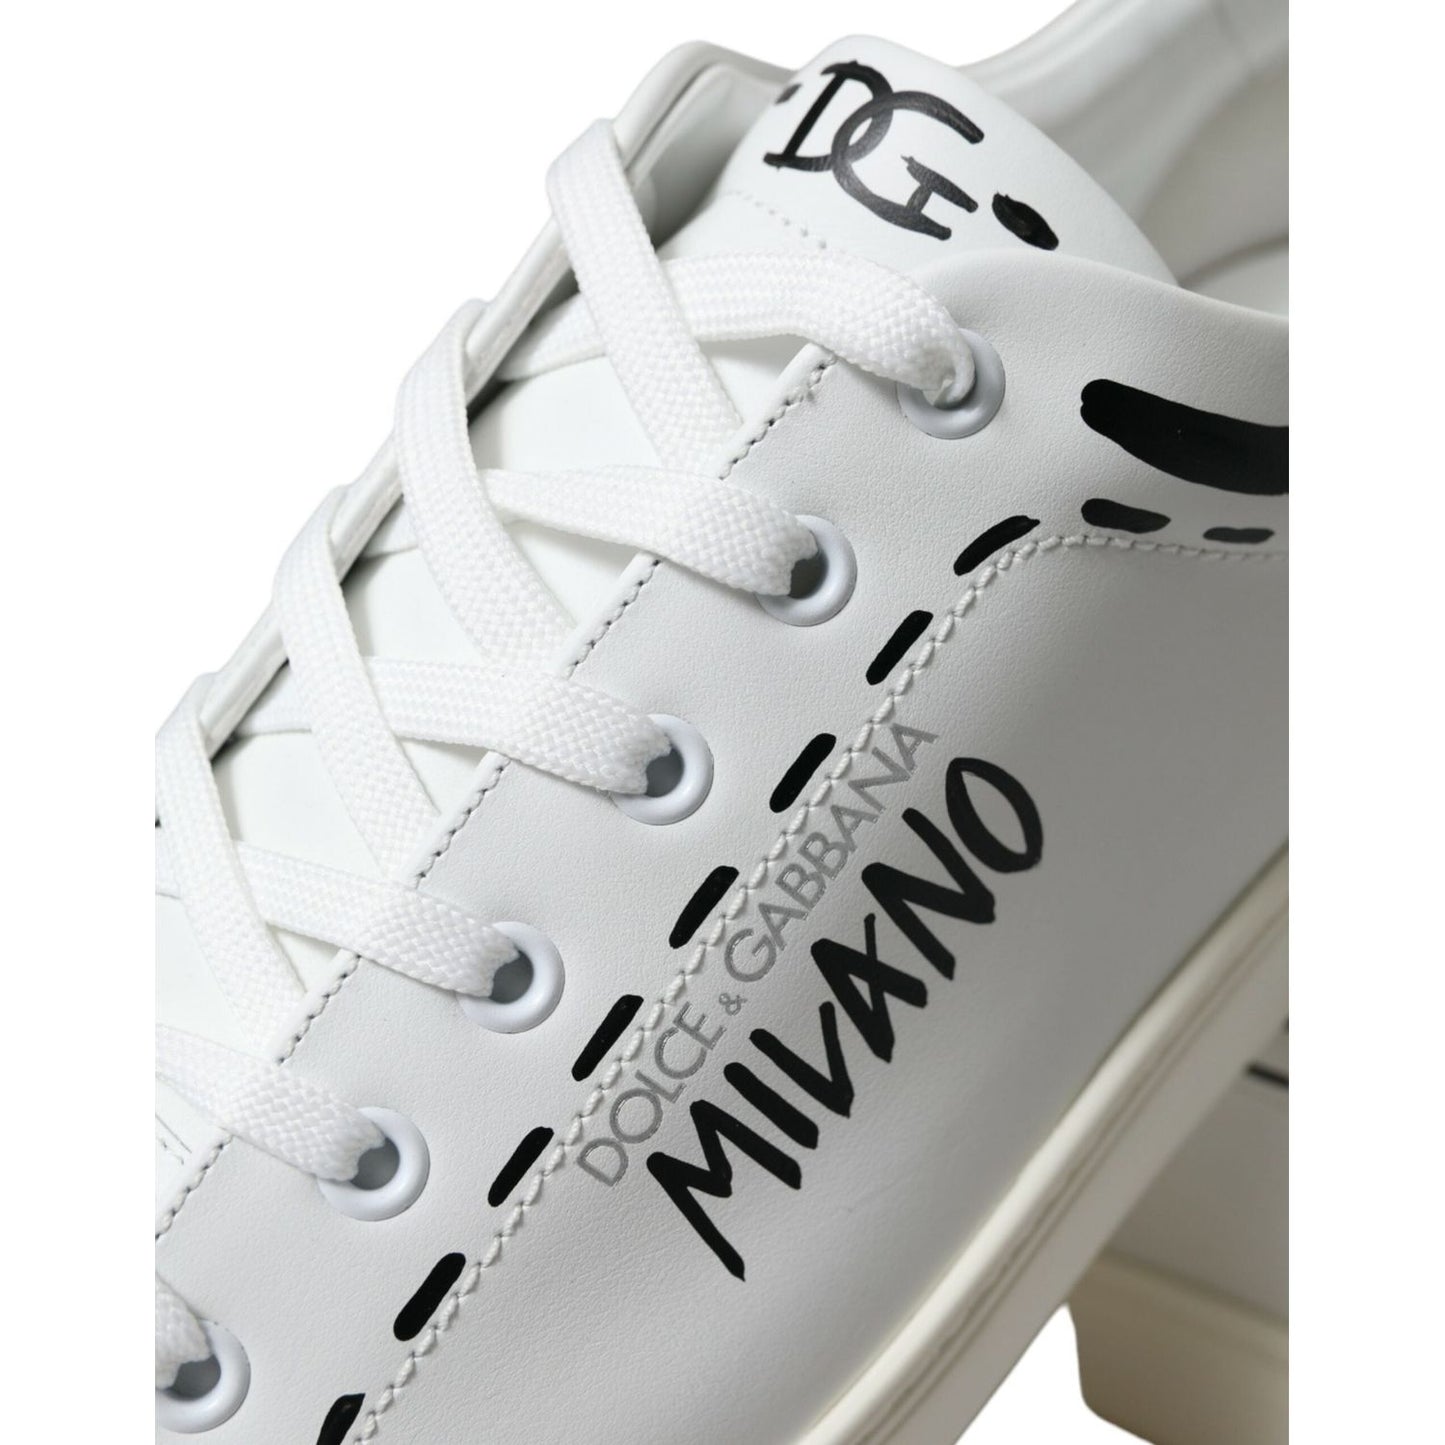 Dolce & Gabbana Elegant White Calfskin Leather Sneakers white-gray-leather-love-milano-sneakers-shoes